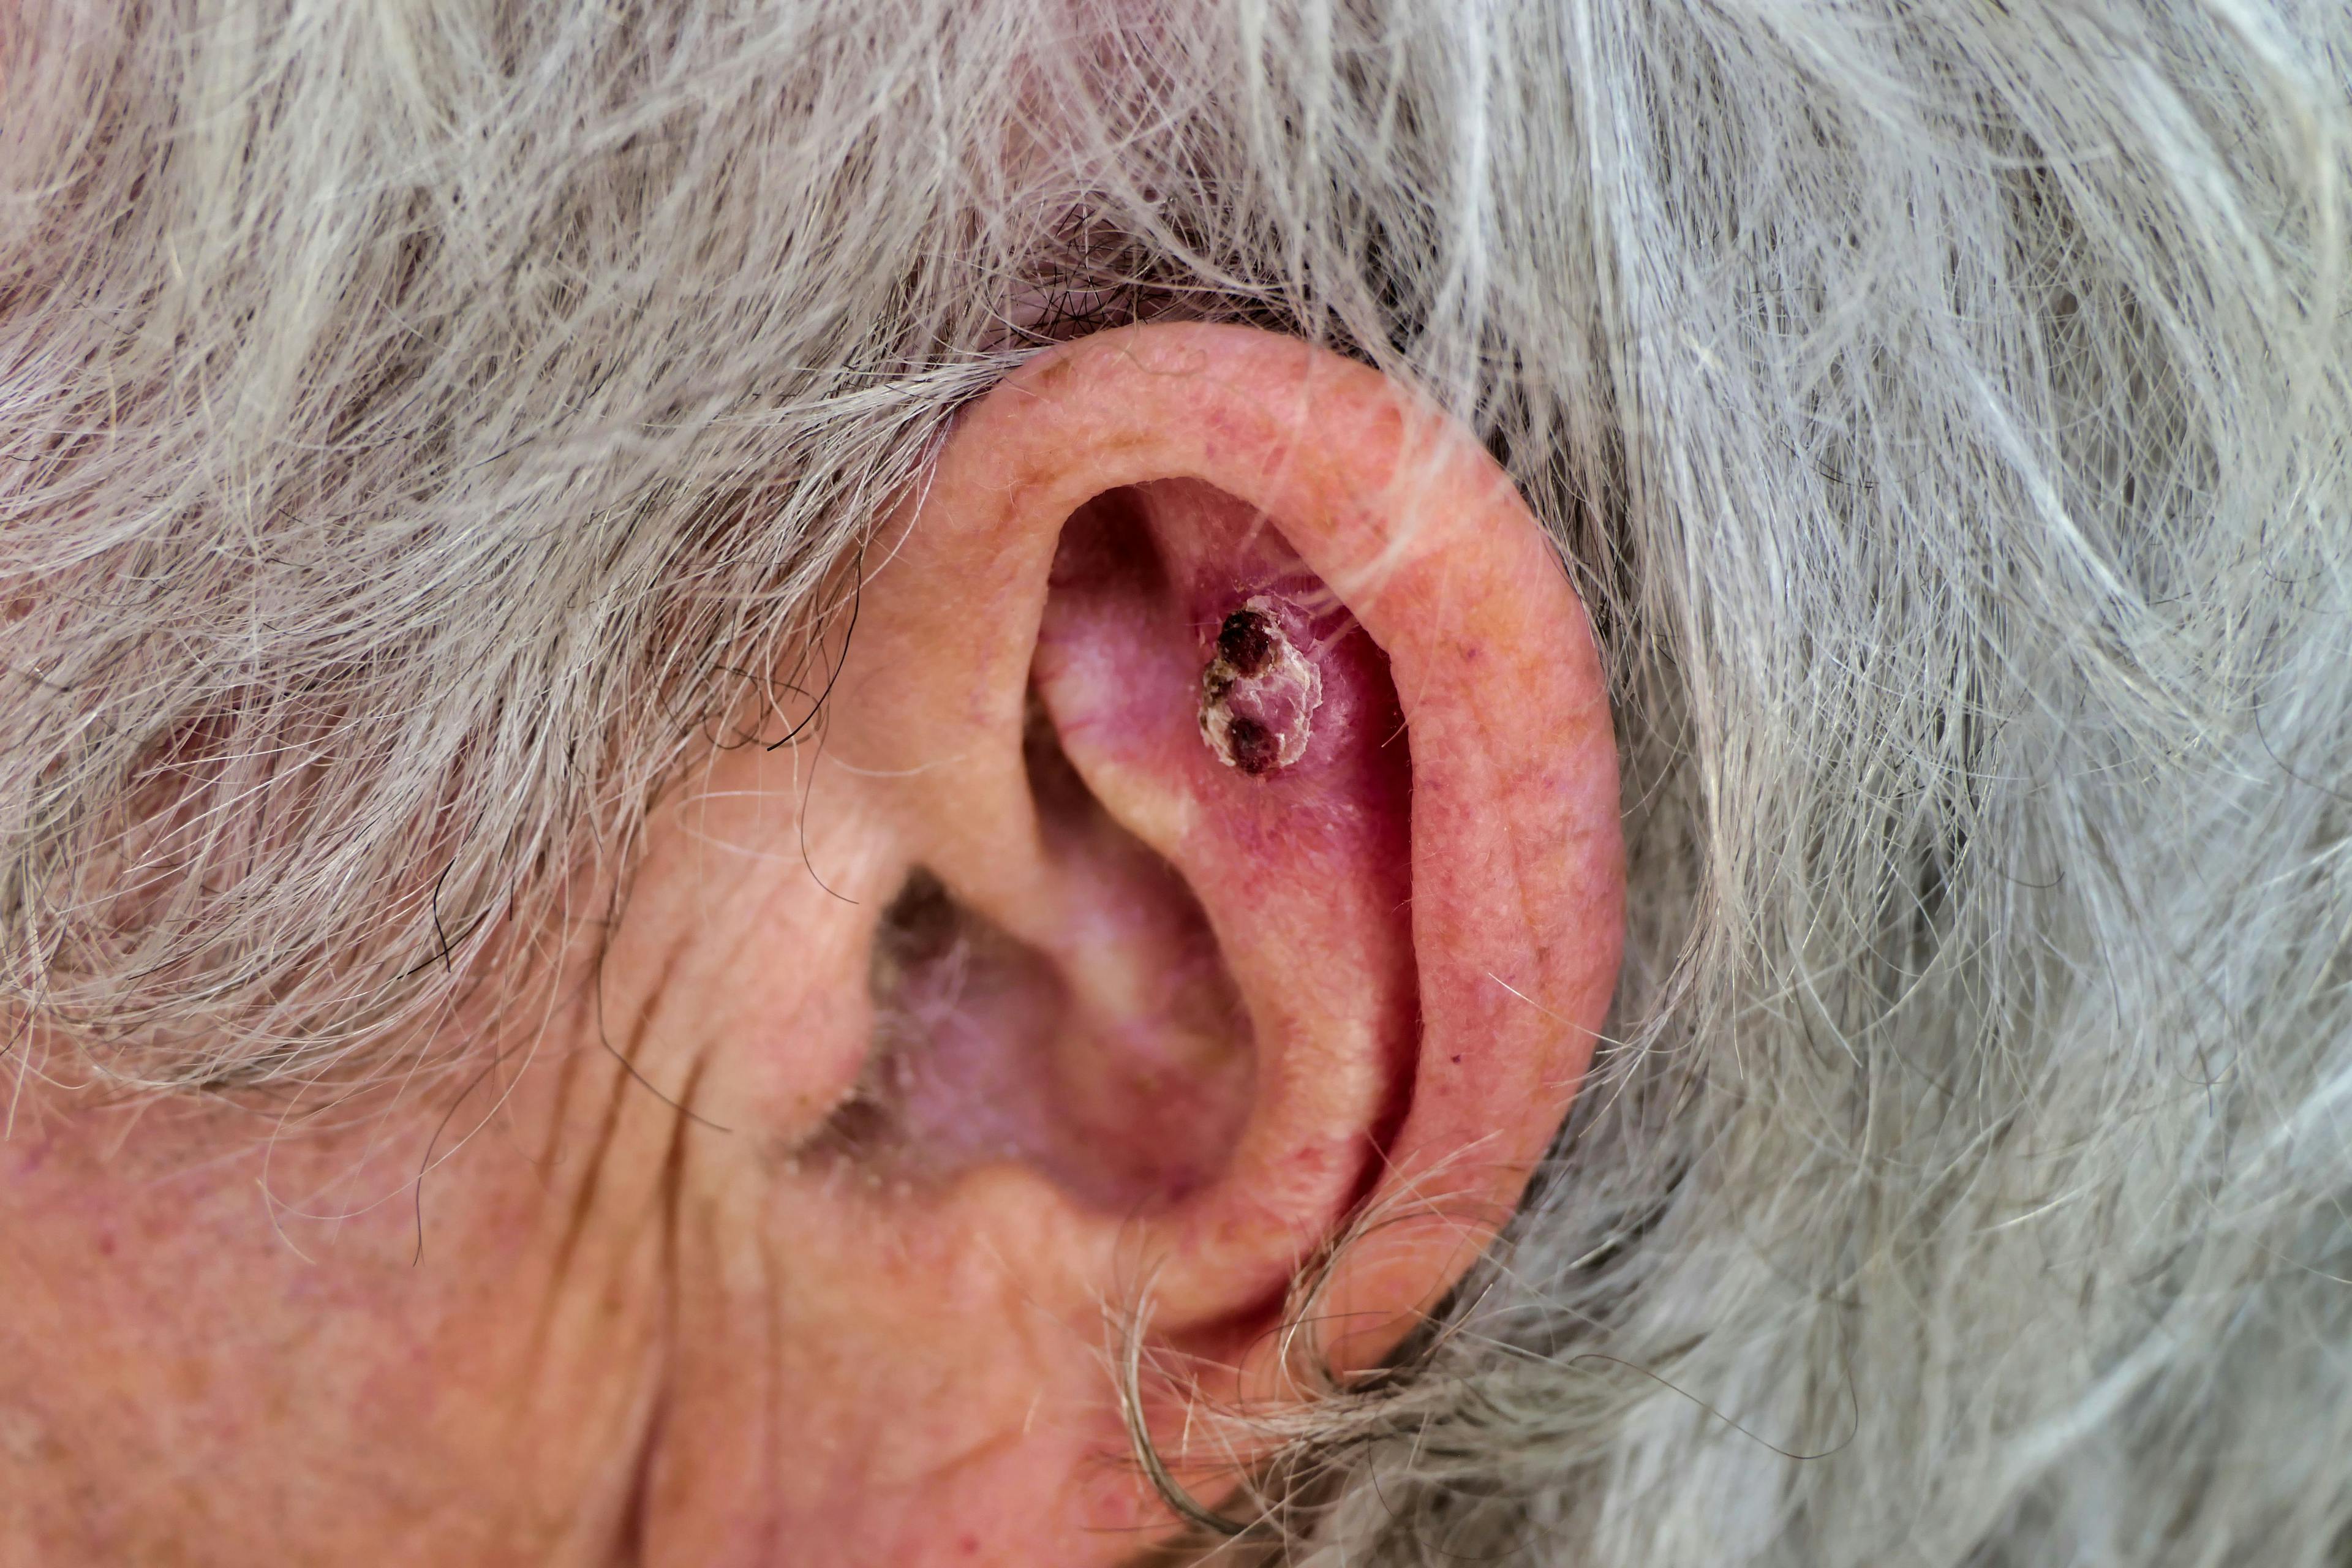 Basal cell carcinoma on a patient's ear | Image Credit: © plazaccameraman - stock.adobe.com